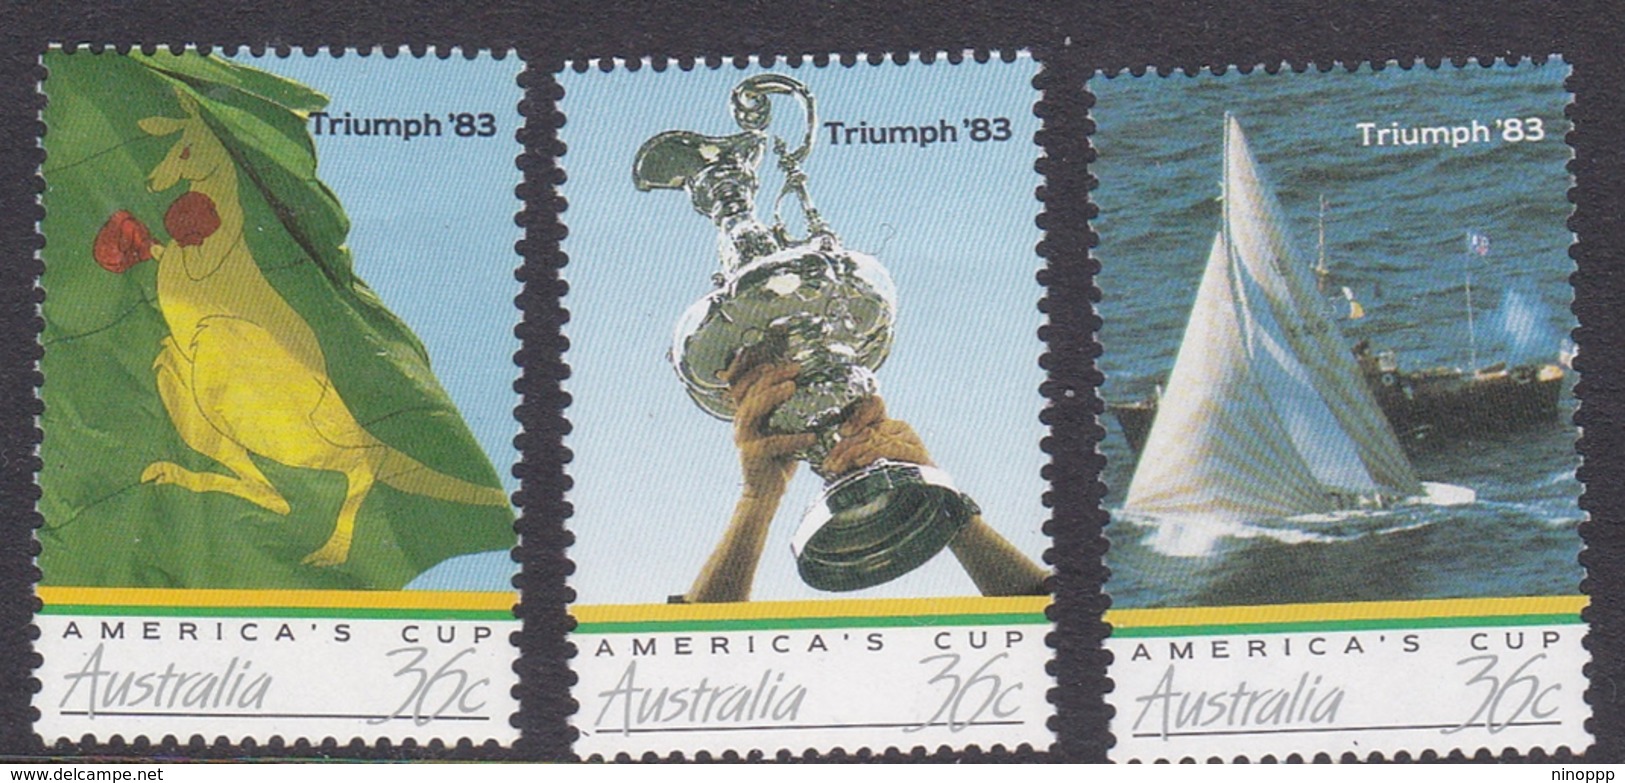 Australia ASC 1044-1046 1986 America's Cup, Mint Never Hinged - Mint Stamps